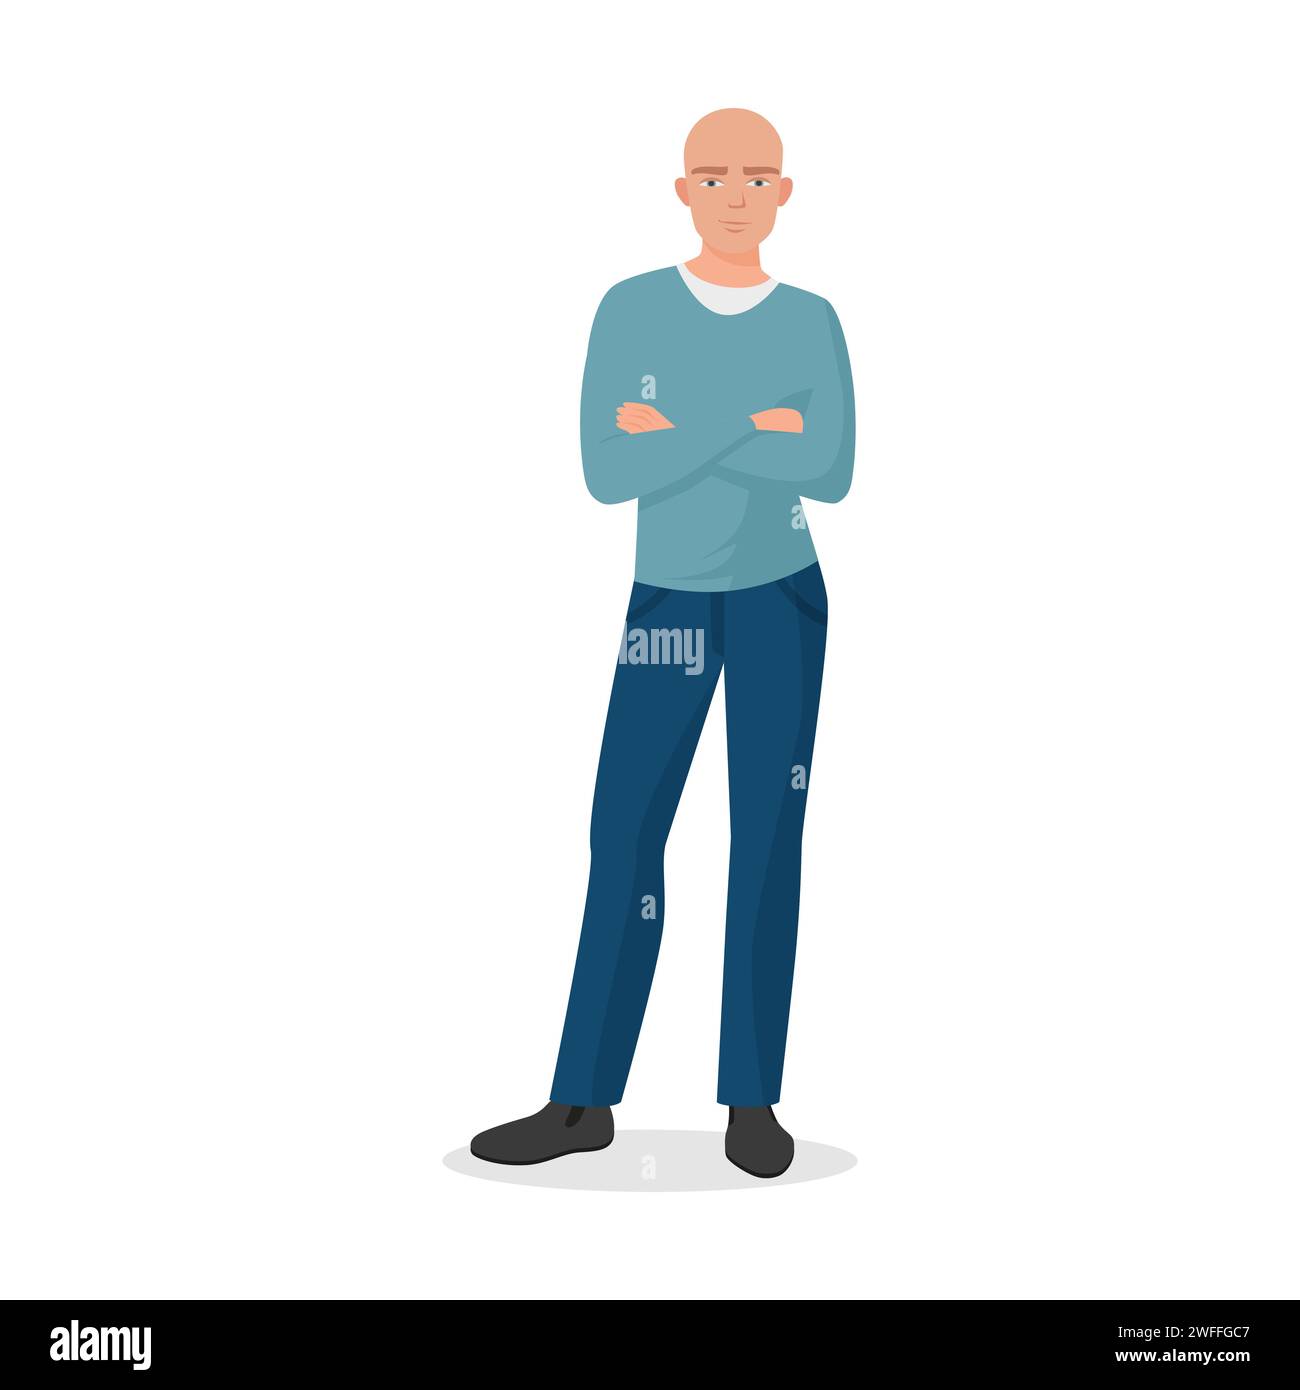 Standing bald man, male character with arms crossed on chest vector illustration Stock Vector